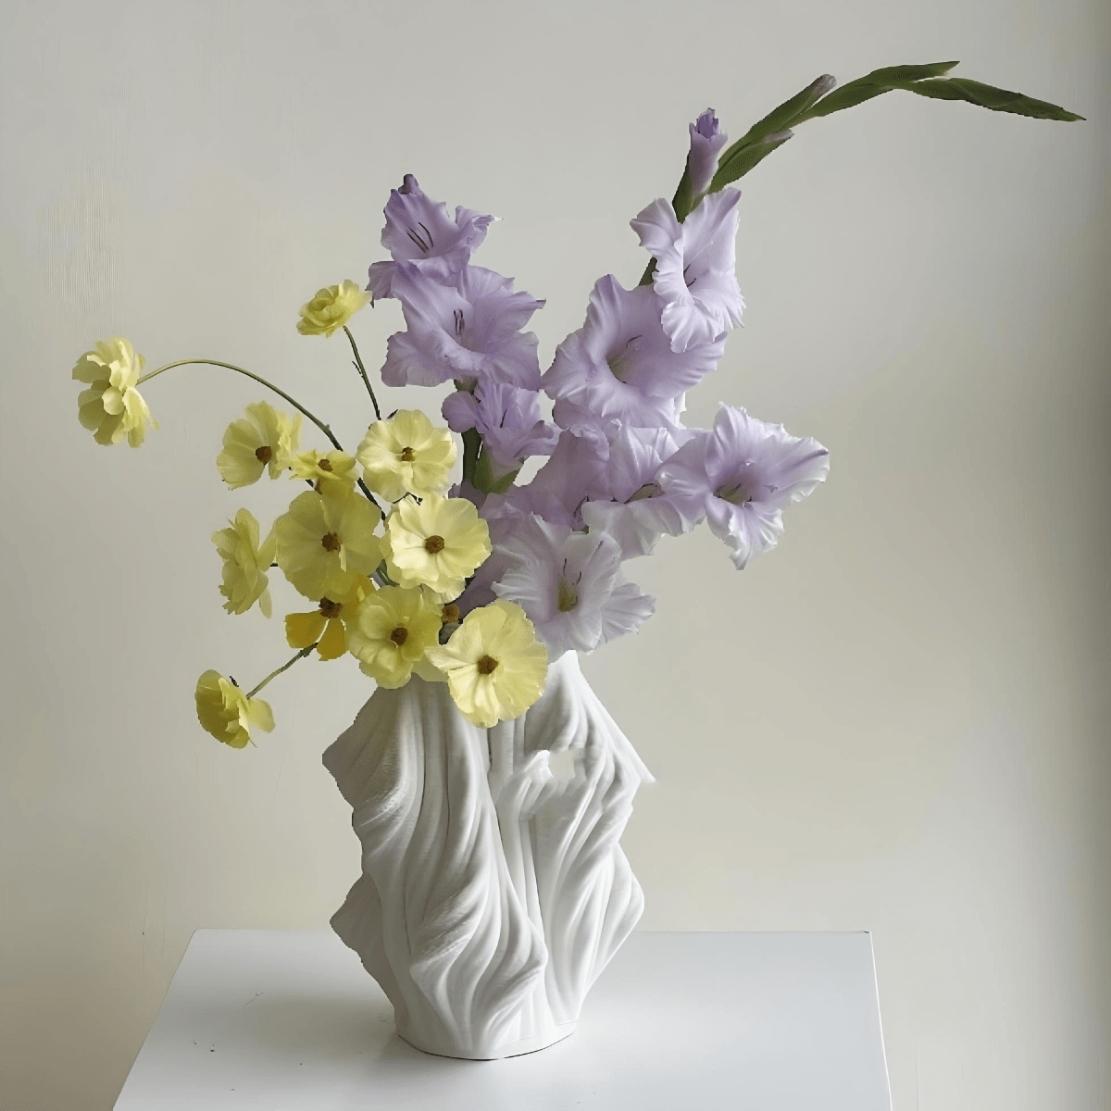 White, ceramic, asymmetrical vase with yellow and purple flowers